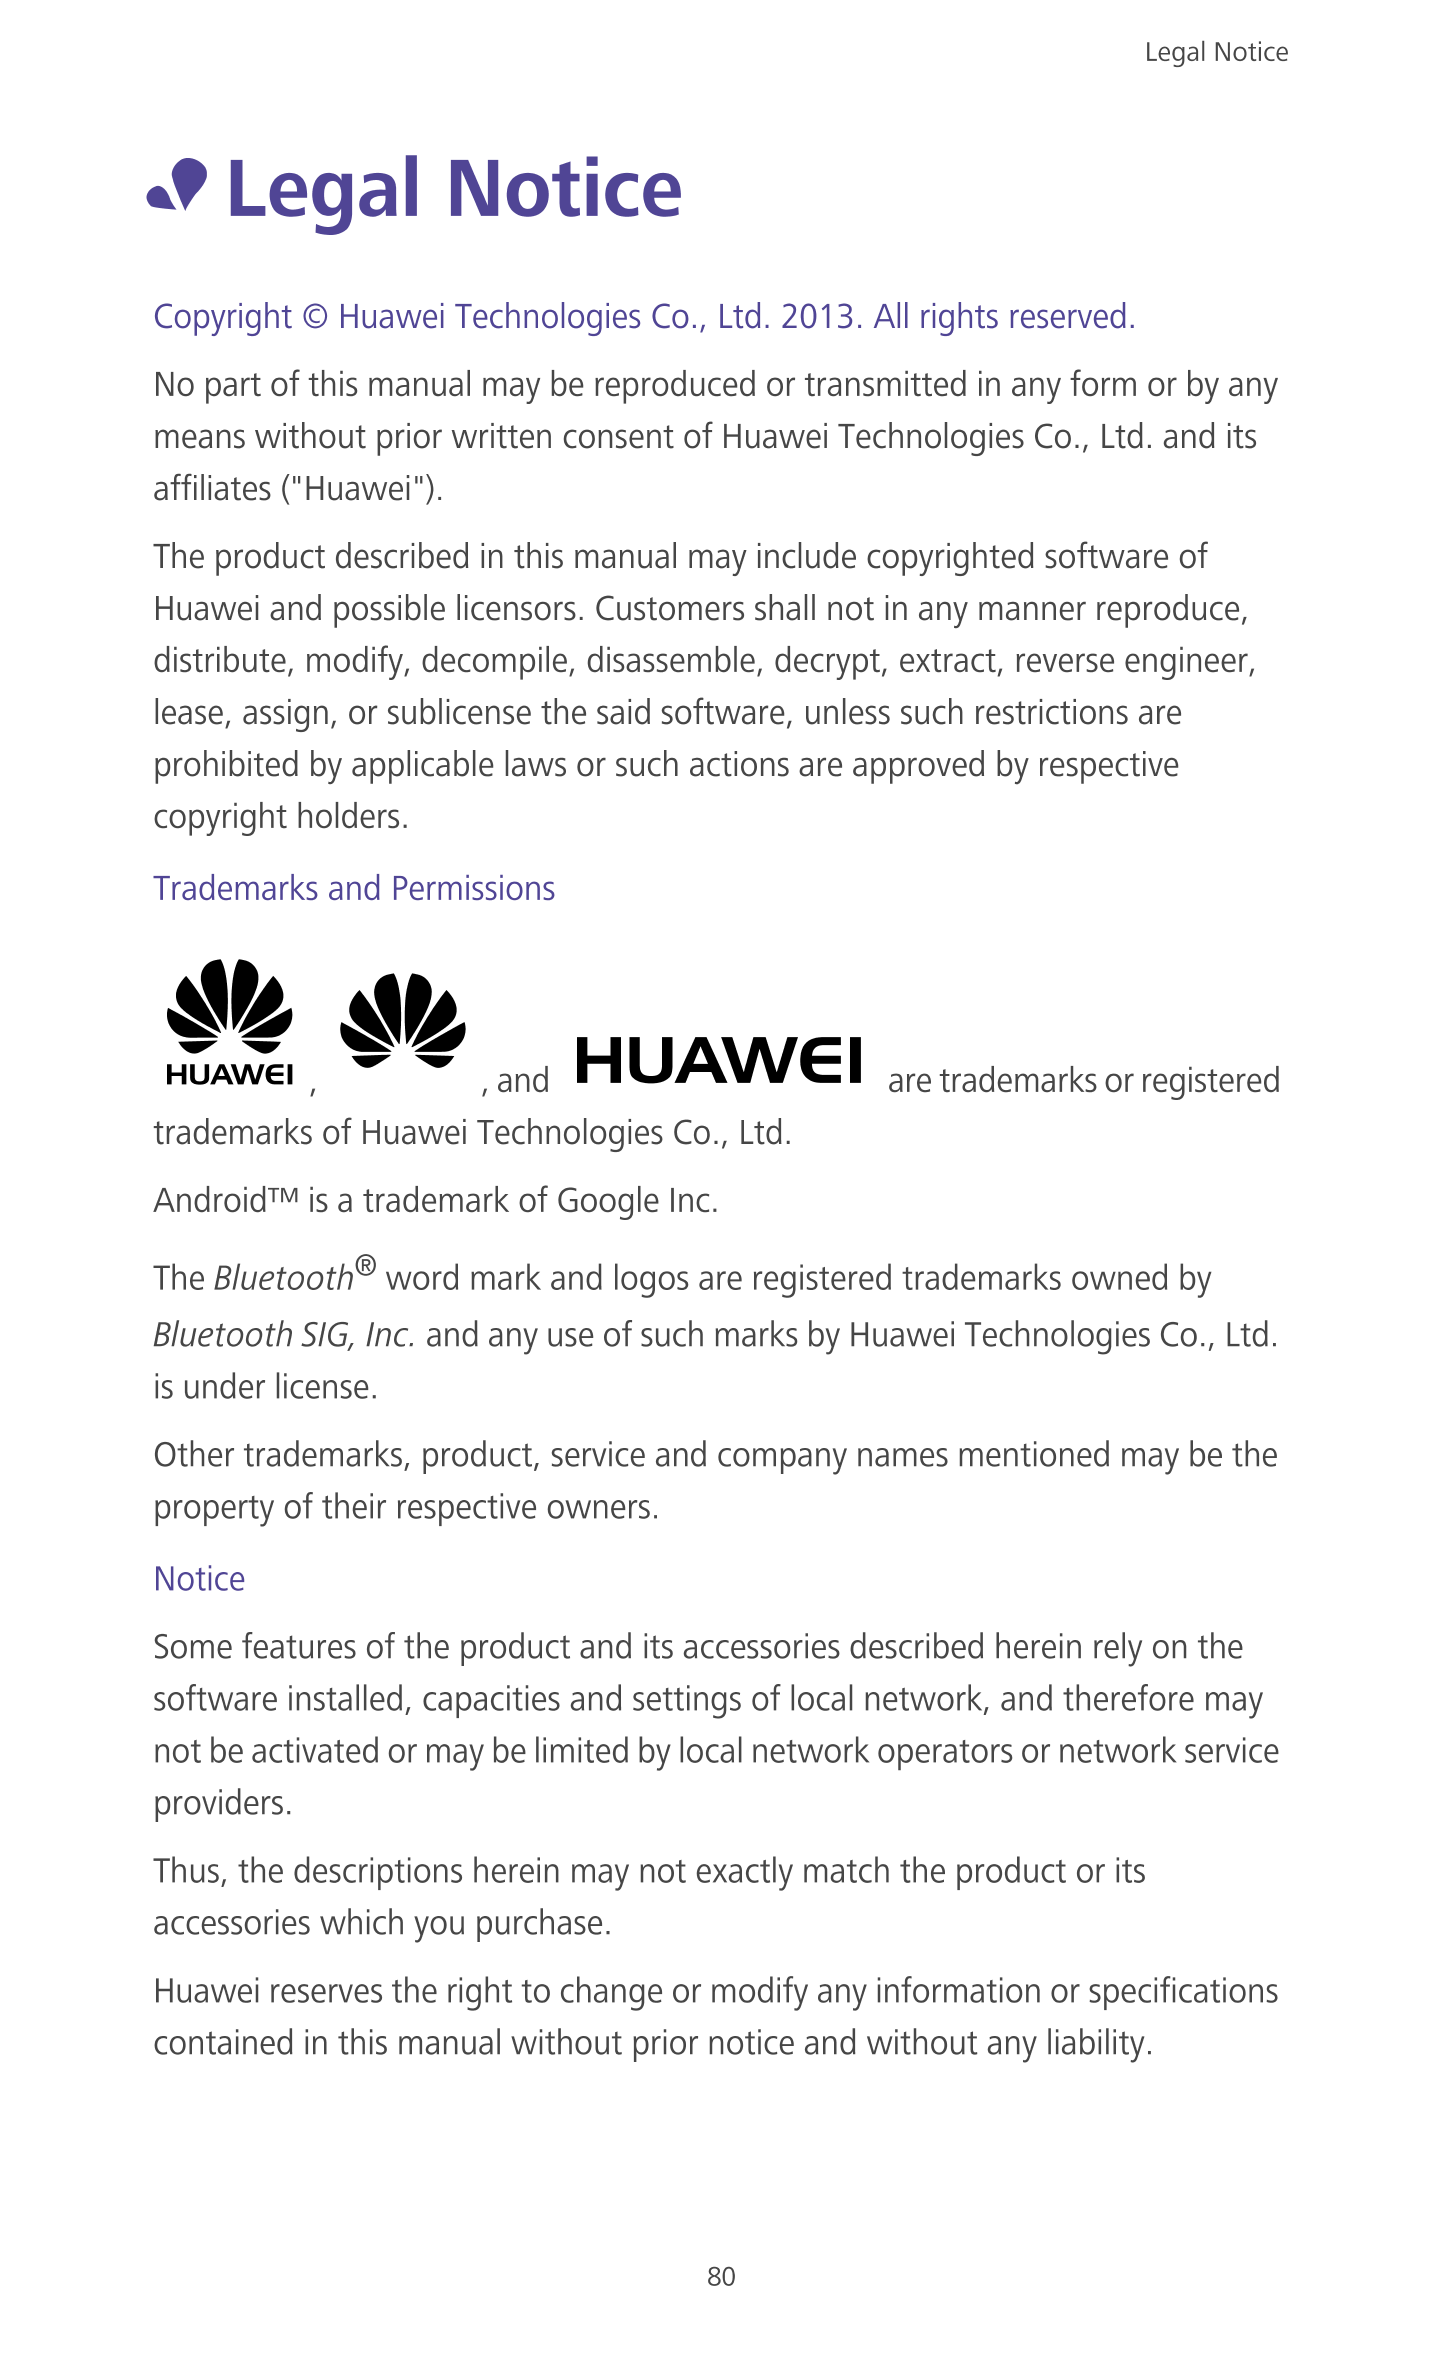 Legal Notice 
•  Legal Notice
Copyright © Huawei Technologies Co., Ltd. 2013. All rights reserved.
No part of this manual may be